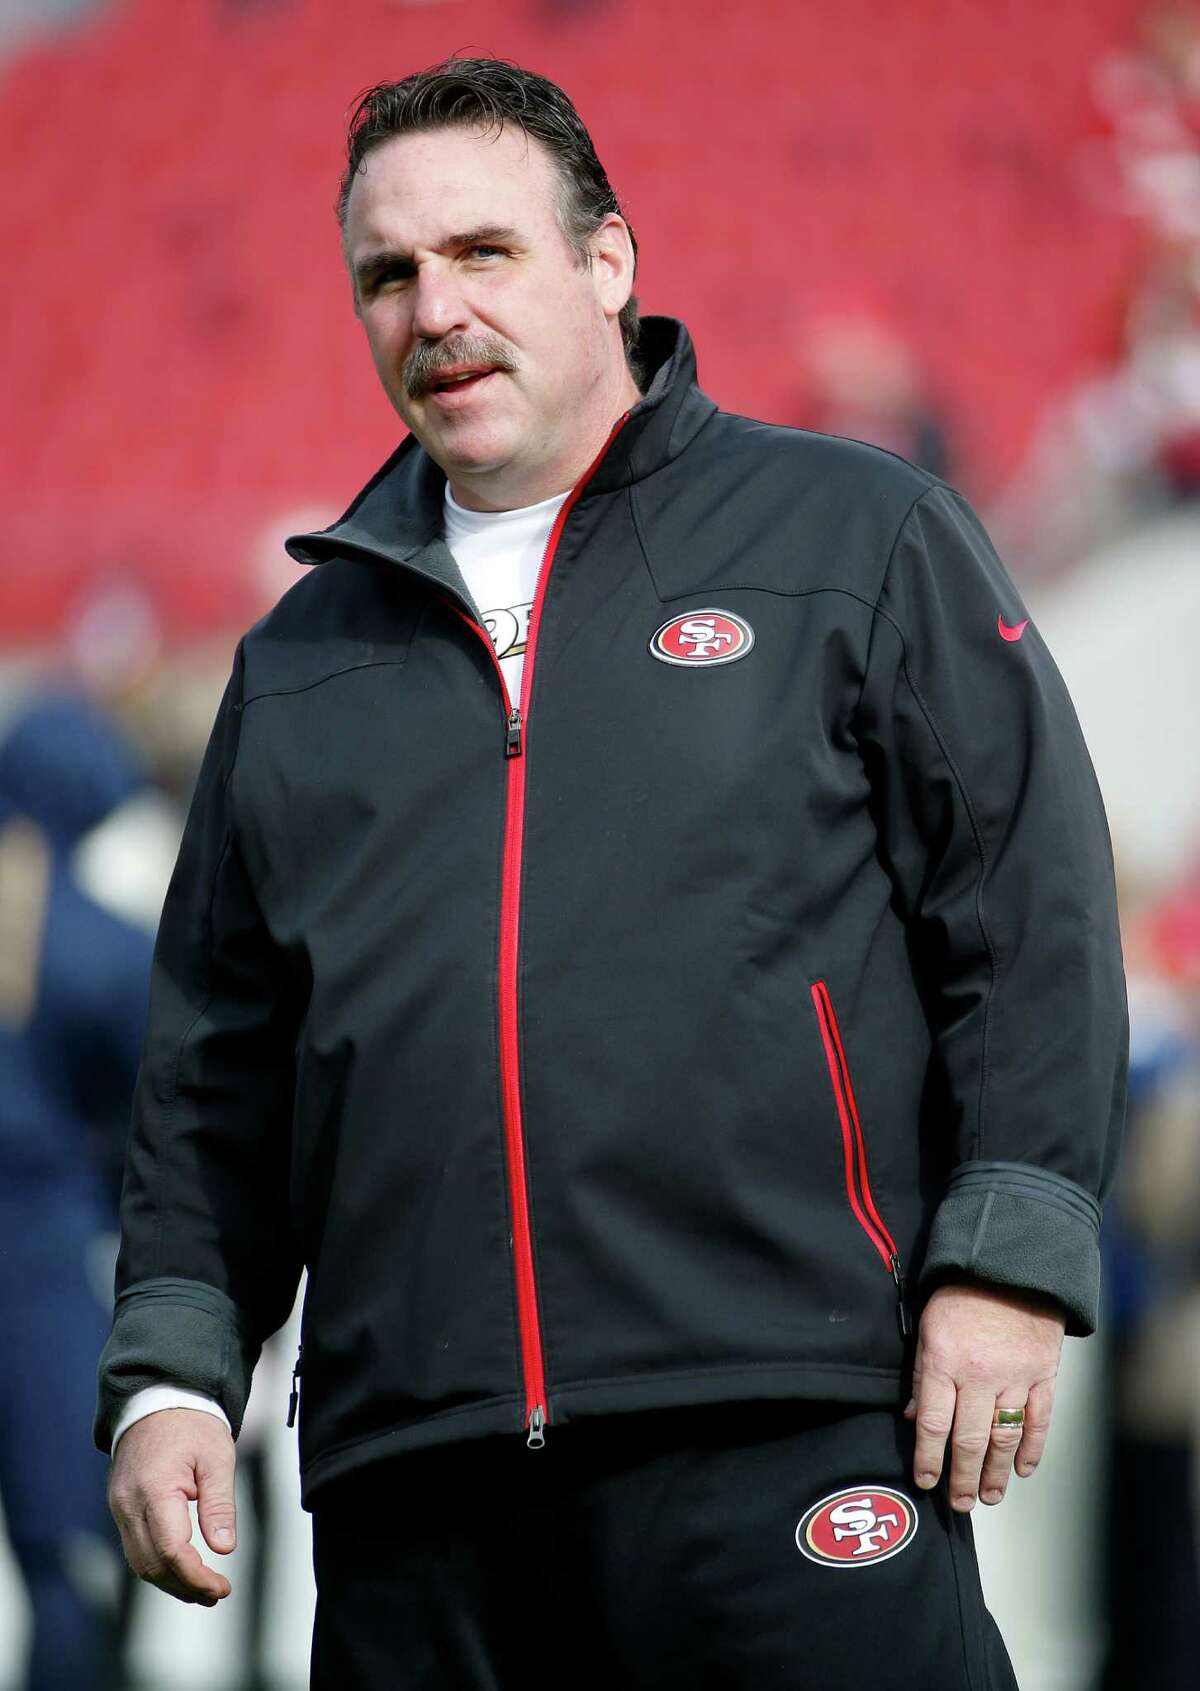 Richard Sherman brilliantly and succinctly describes Jim Tomsula's 1 year  as 49ers head coach